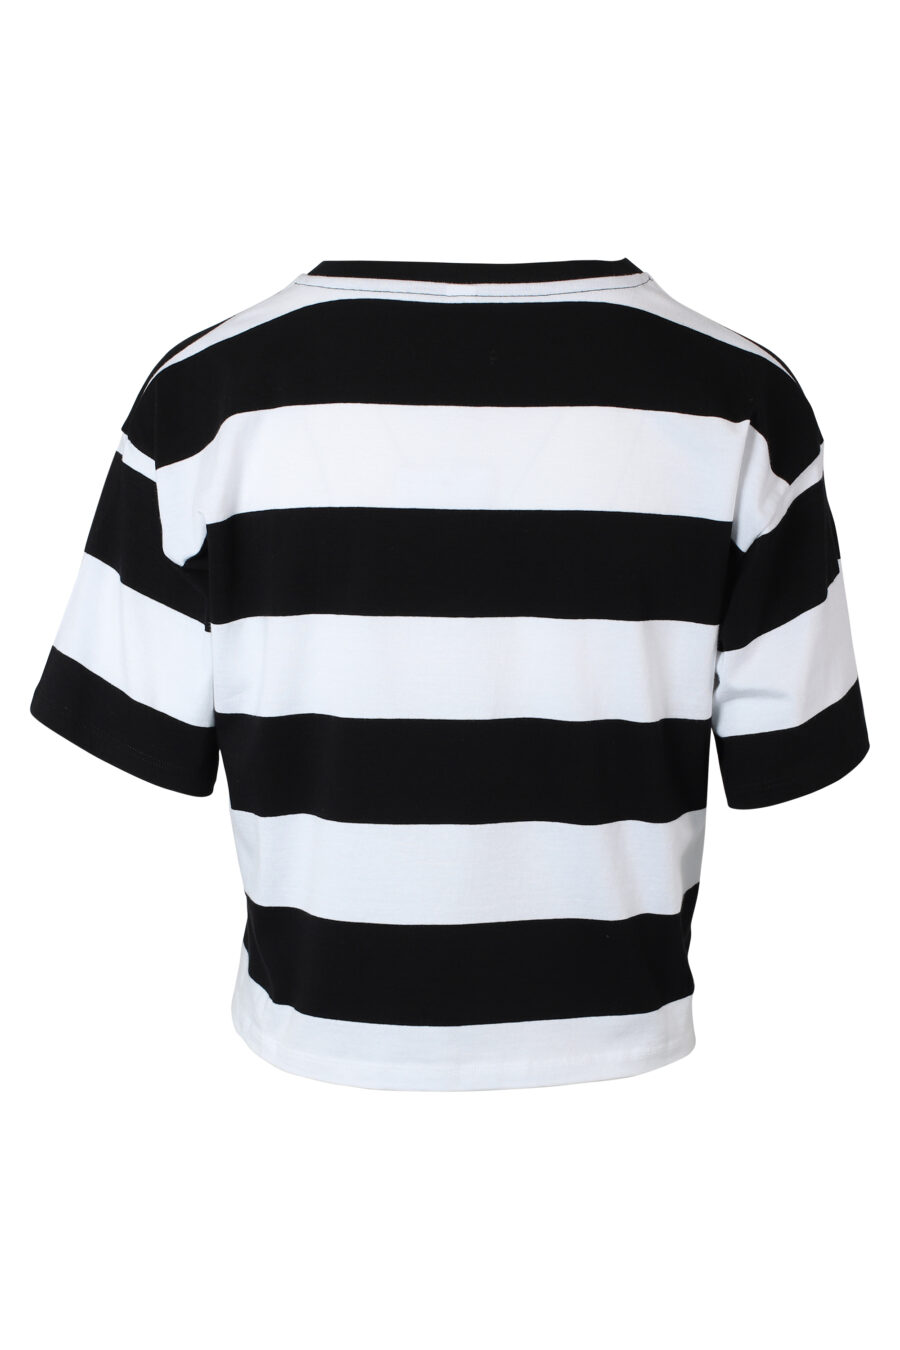 Two-coloured black and white striped T-shirt with gold mini-logo - IMG 9795